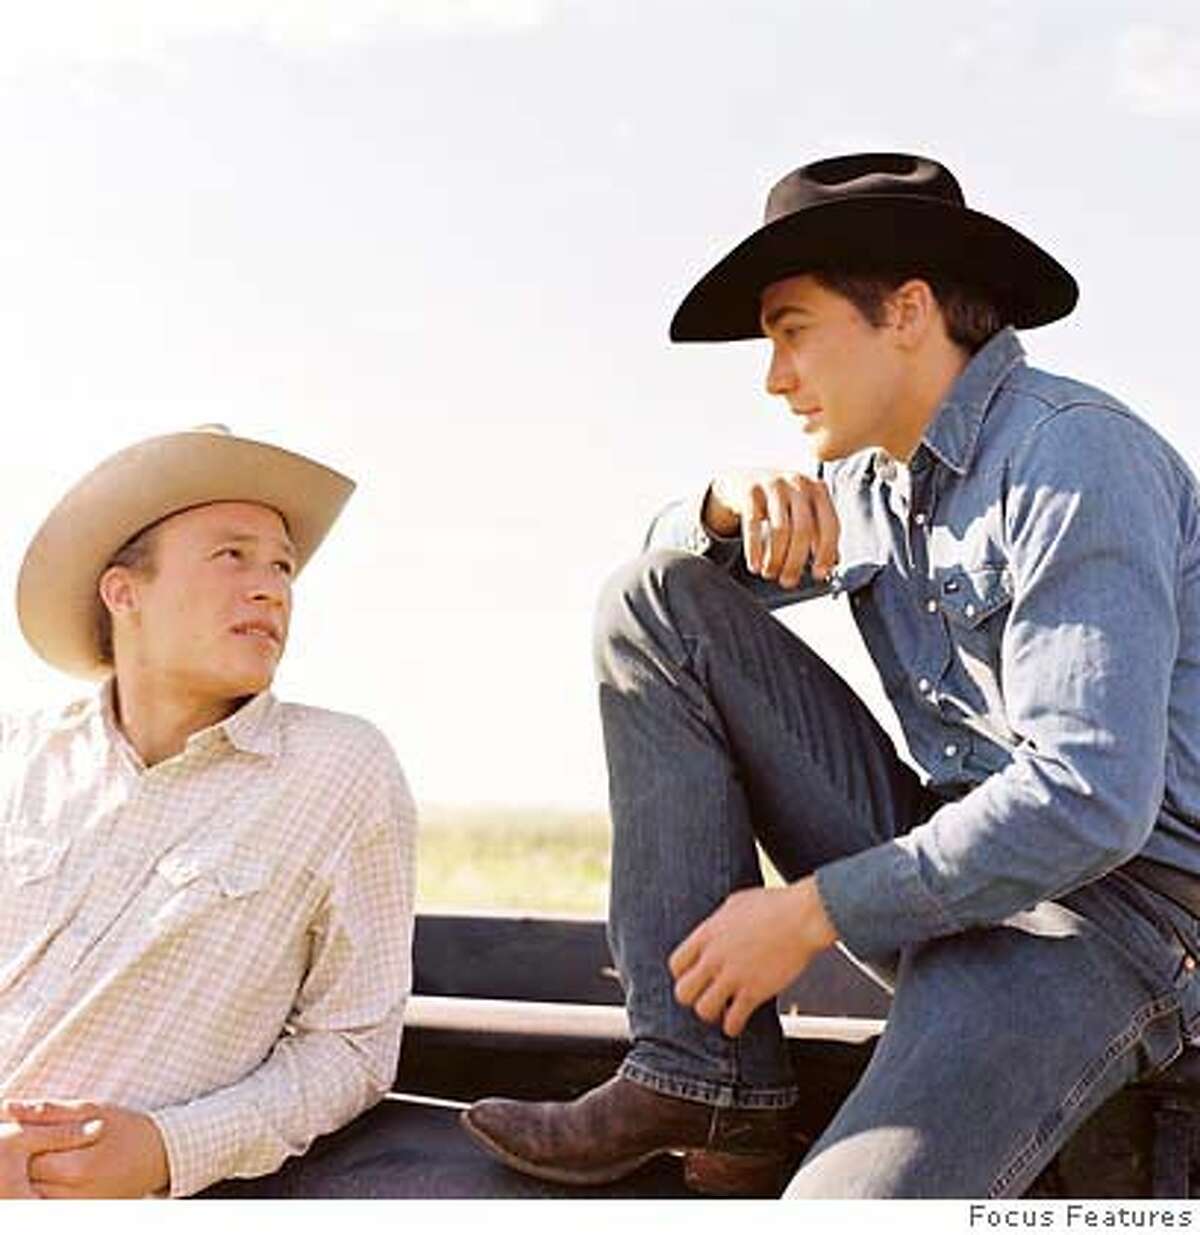 Still from the movie, "Brokeback Mountain," with stars Heath Ledger and Jake Gyllenhaal. Photo: Courtesy of Focus Features